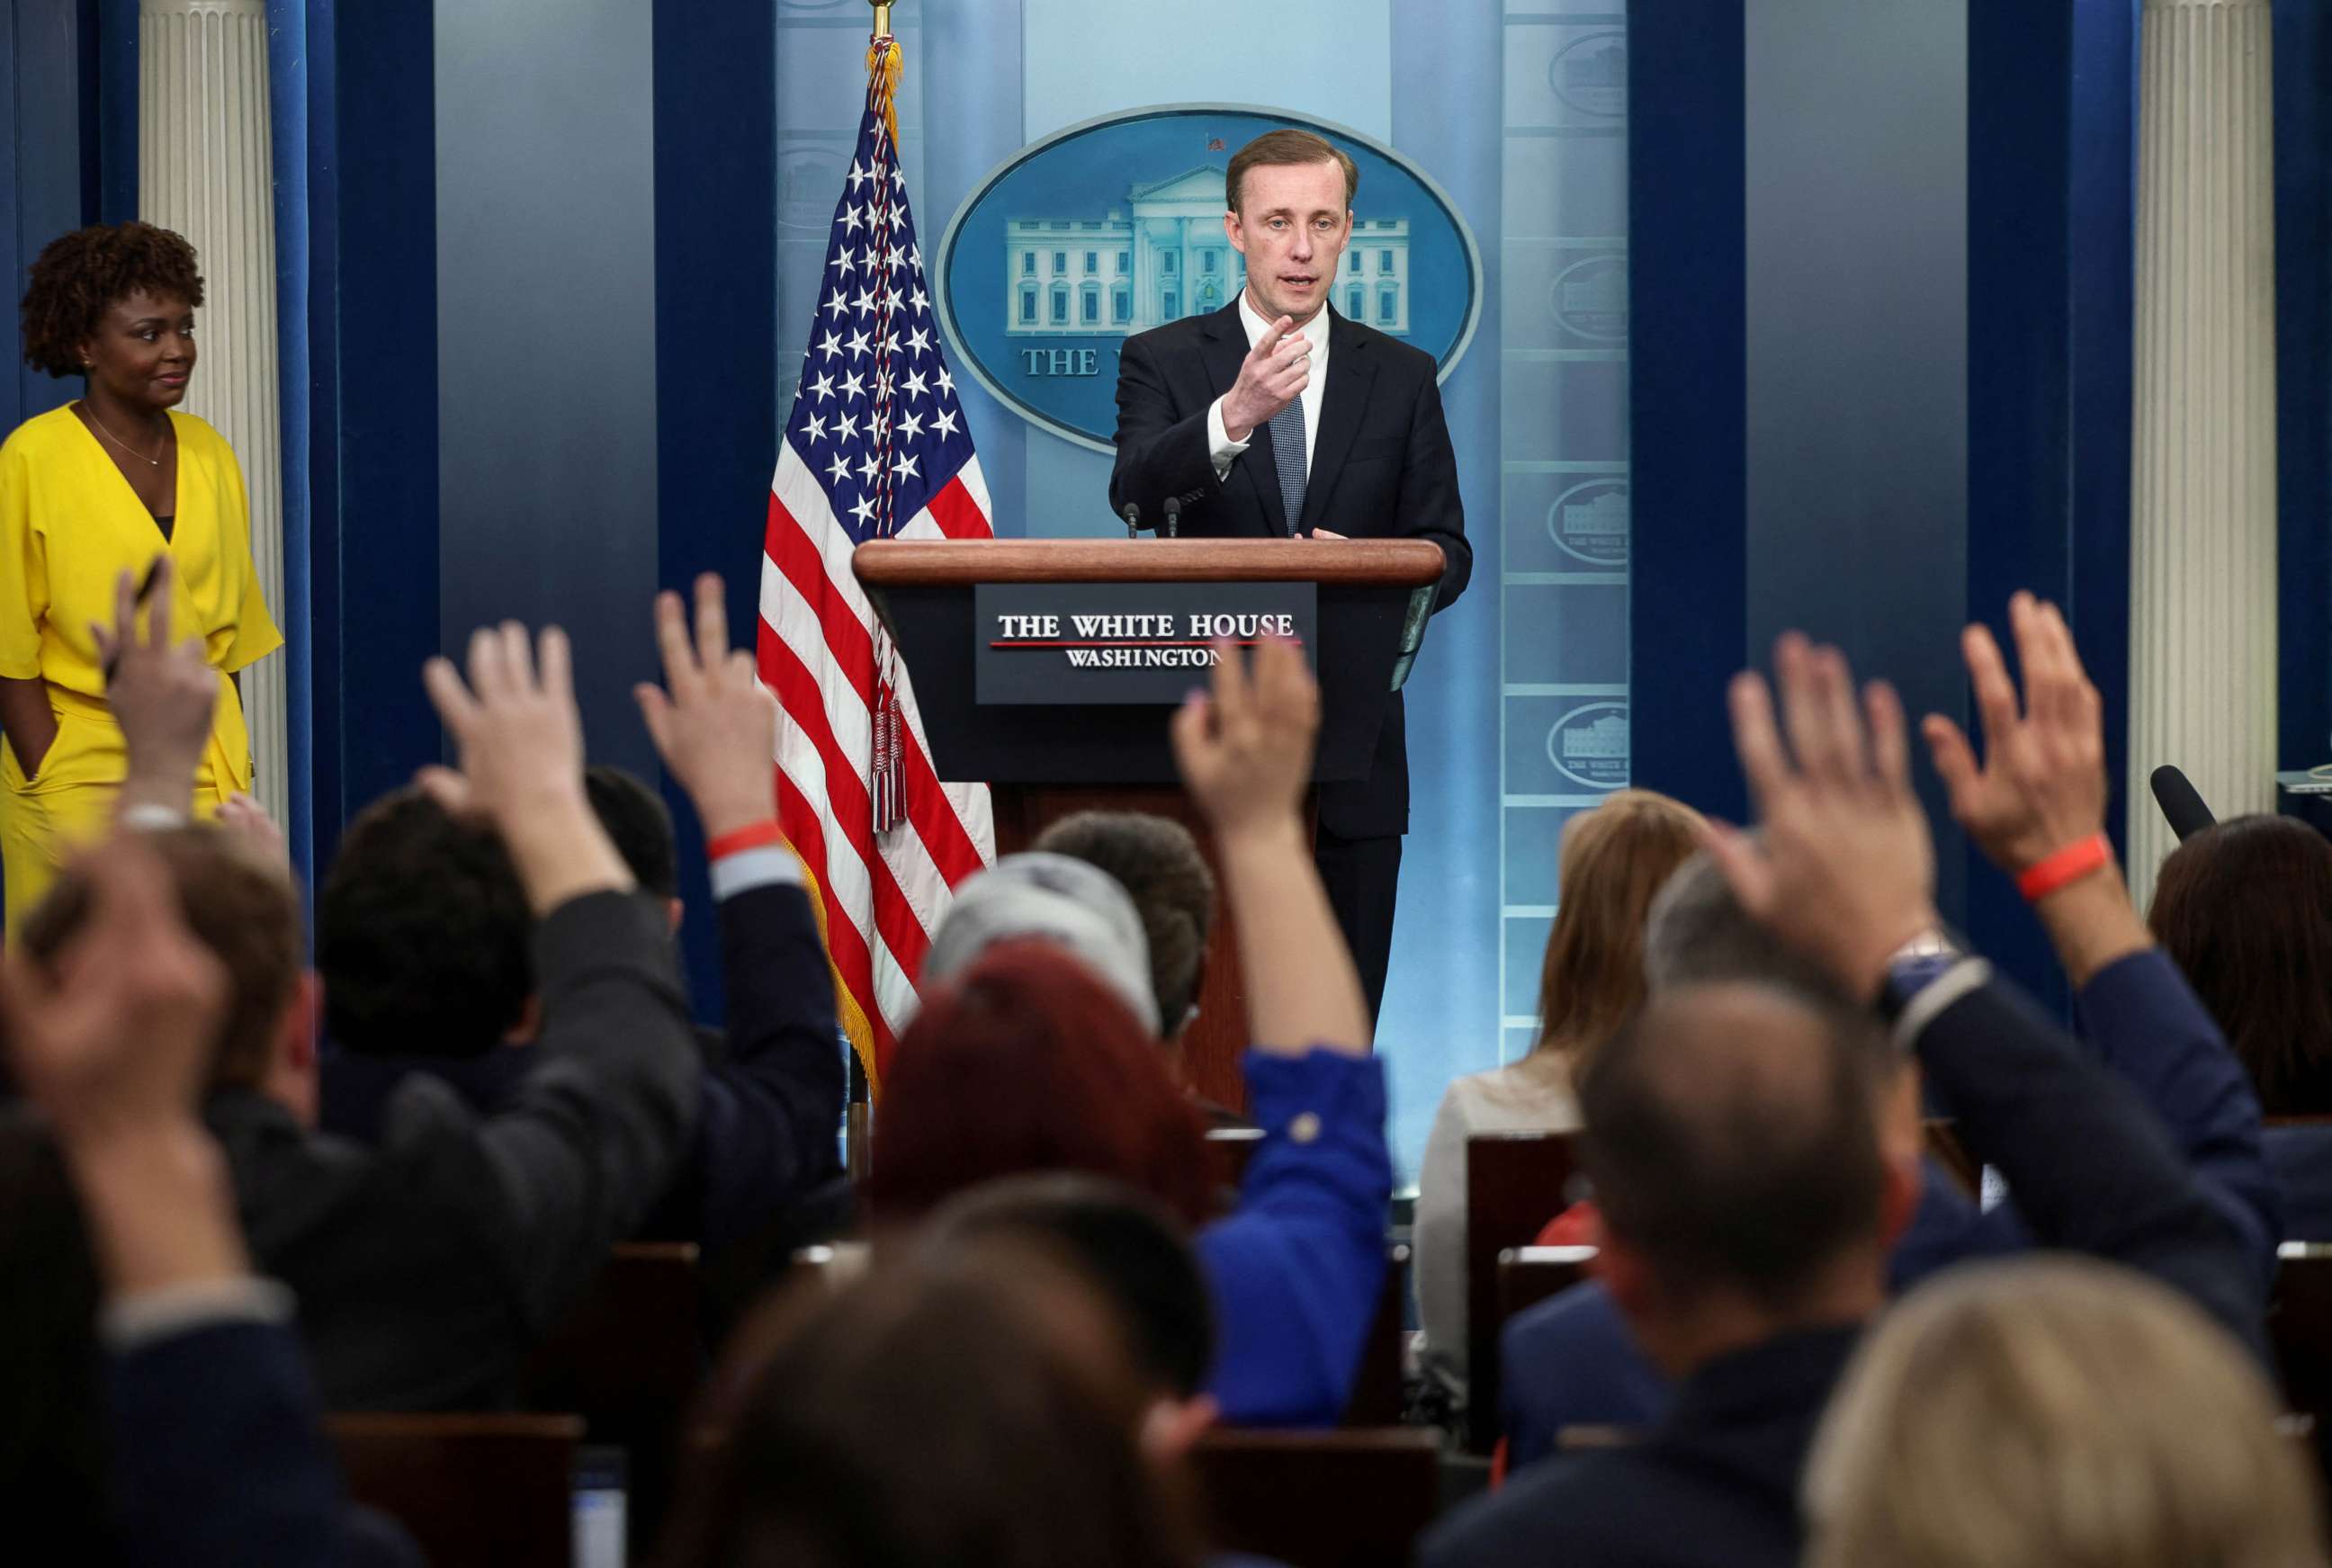 PHOTO: National Security Advisor Jake Sullivan answers questions while Press Secretary Karine Jean-Pierre looks on, during the daily media briefing at the White House in Washington, May 18, 2022.